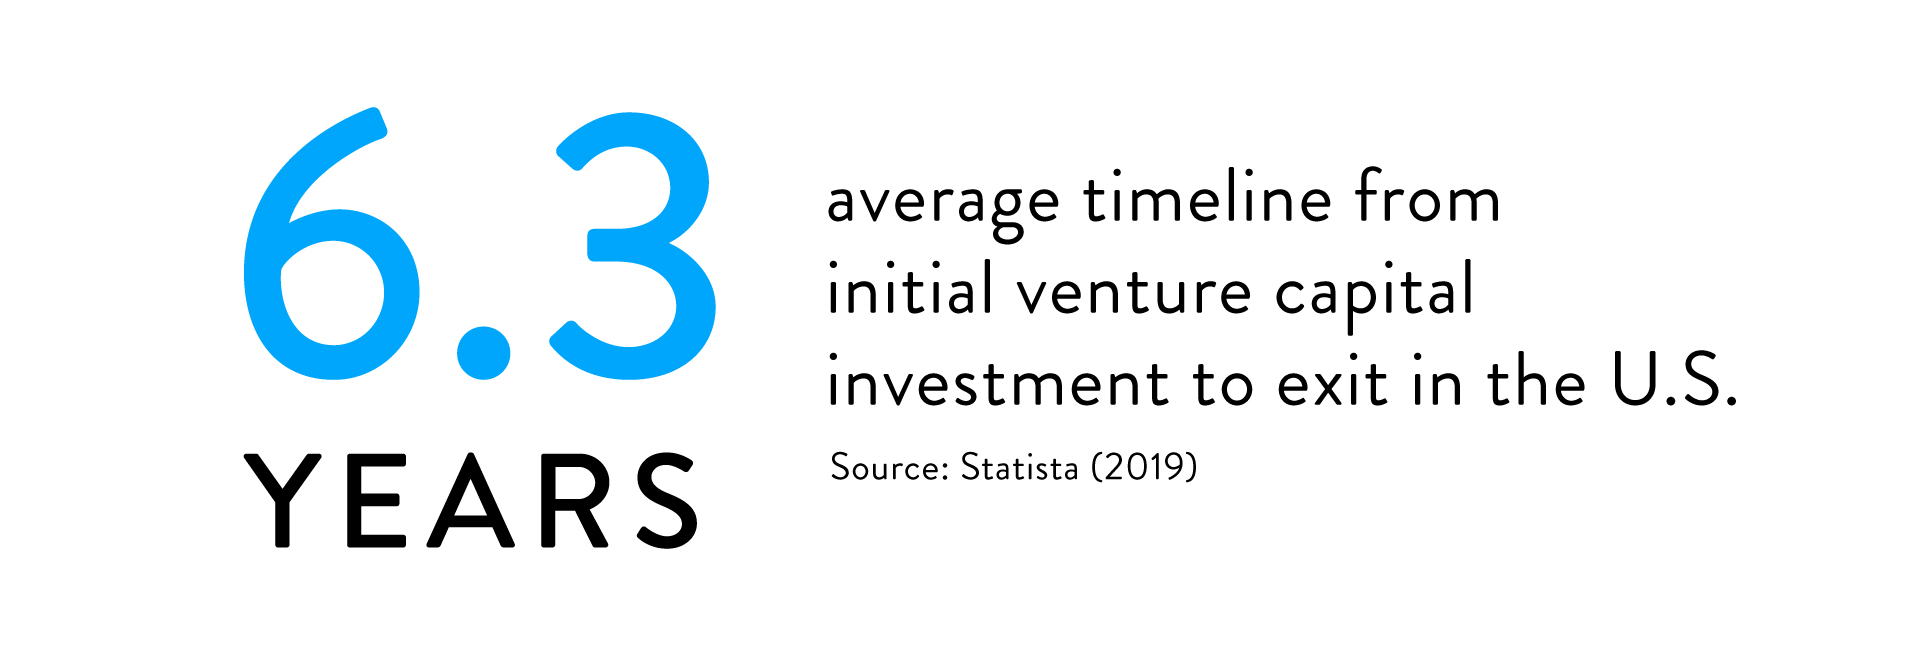 Average timeline from initial venture capital investment to exit